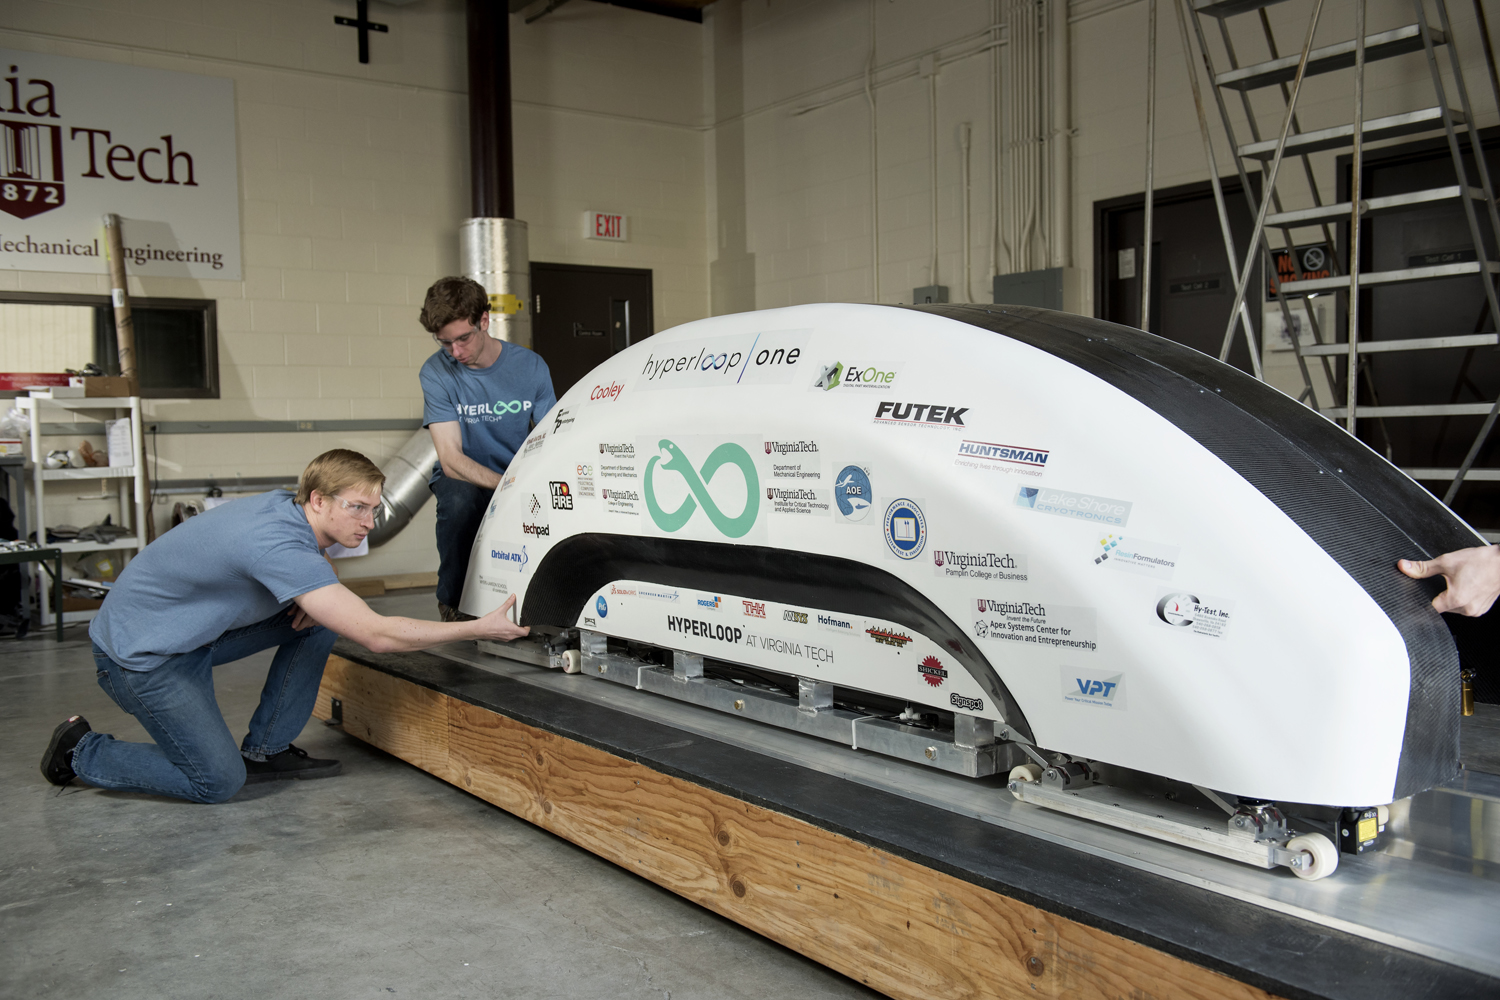 Hyperloop at Virginia Tech team with the final pod they have built for the competition at SpaceX. (Courtesy Virginia Tech College of Engineering)